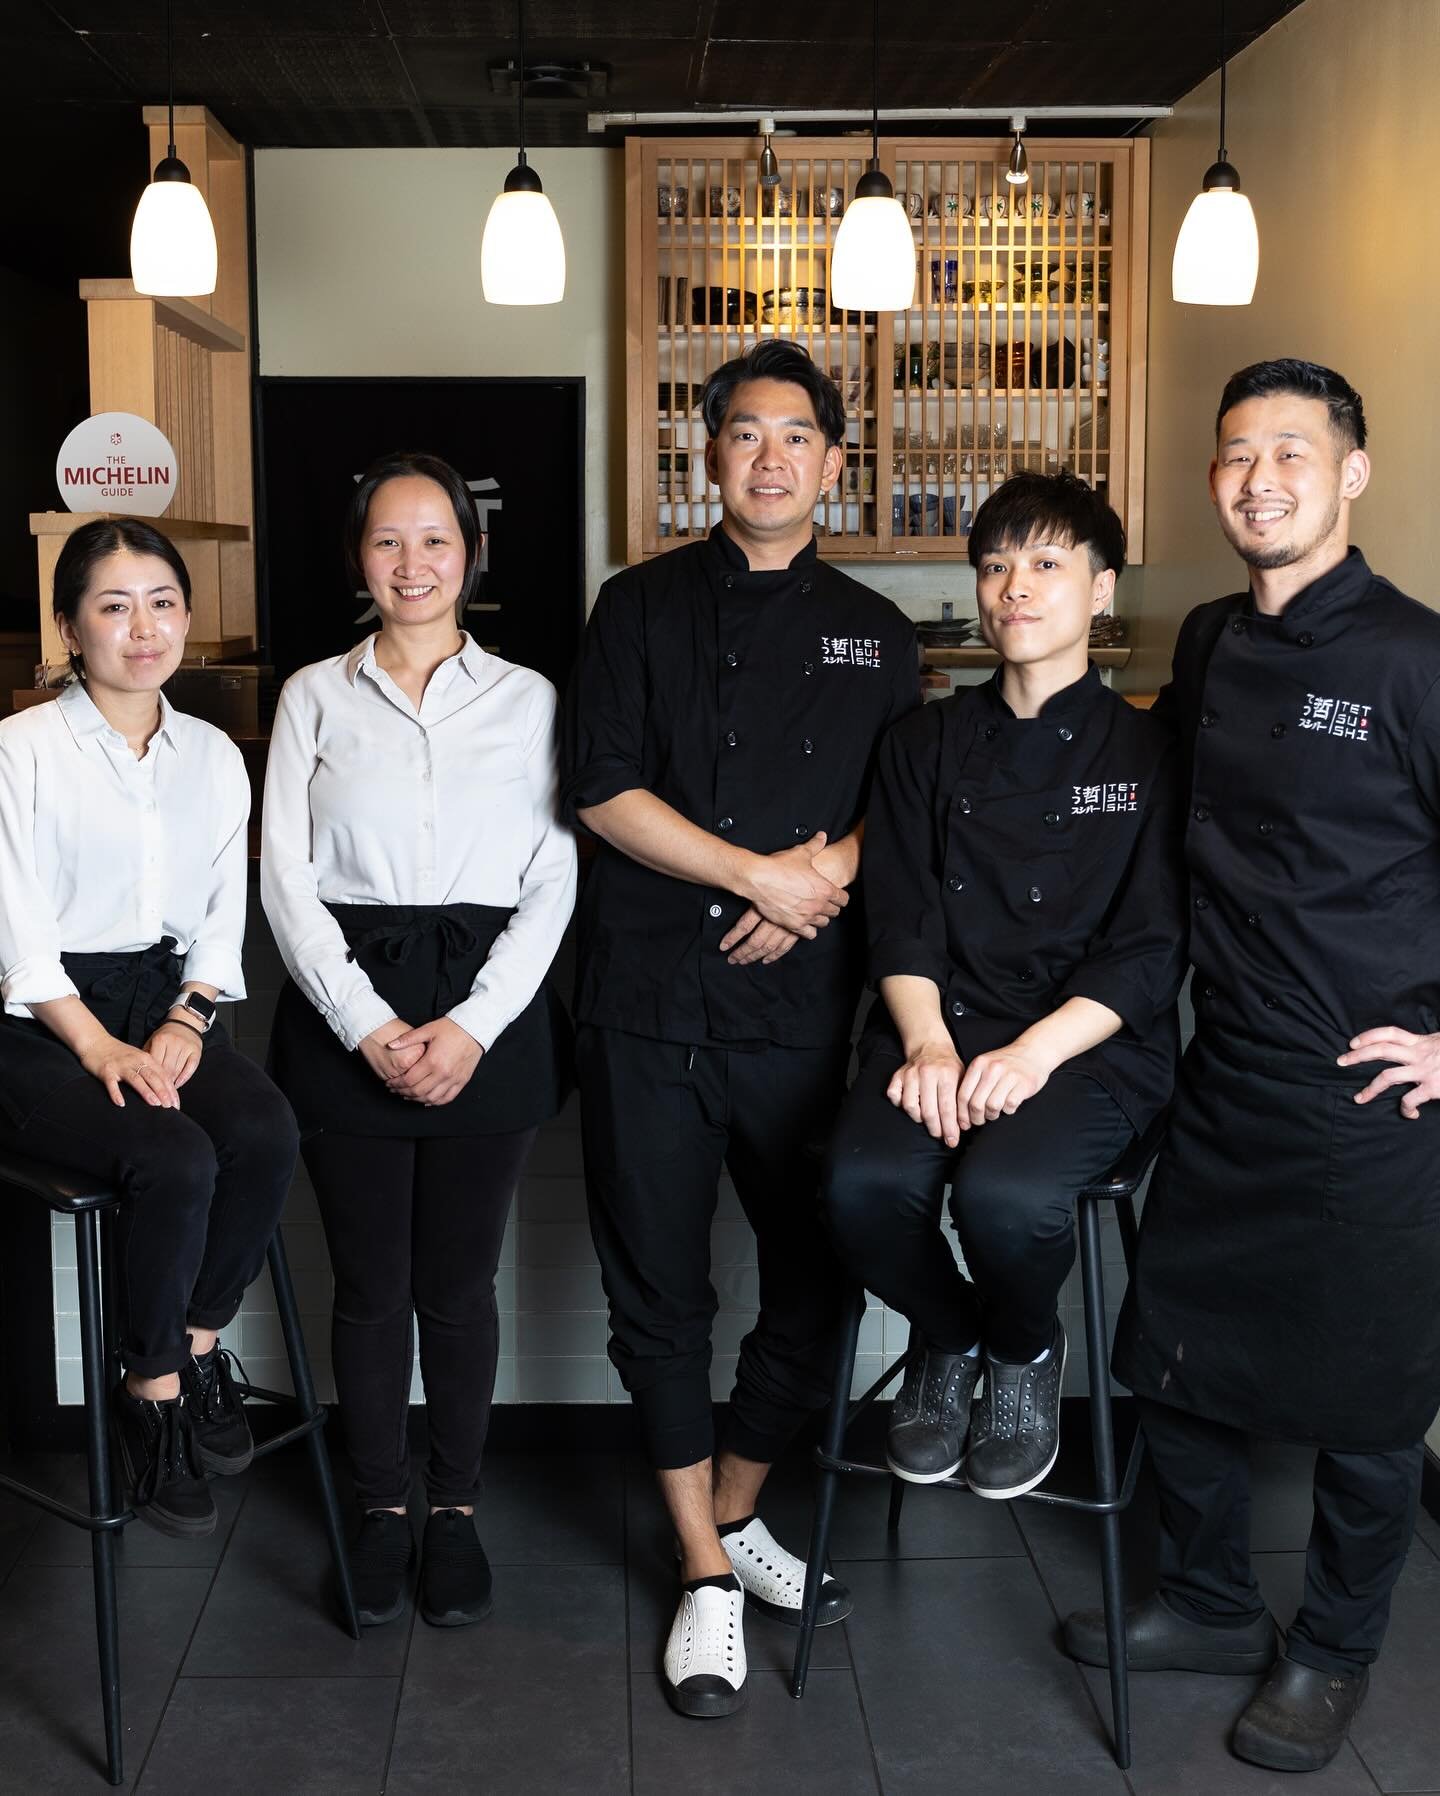 Honoured and humbled to receive the bronze award in the upscale Japanese restaurant category at @vanmag_com Restaurant Award. A heartfelt thank you to the judges for acknowledging our dedication to quality and authenticity. This is a testament to the